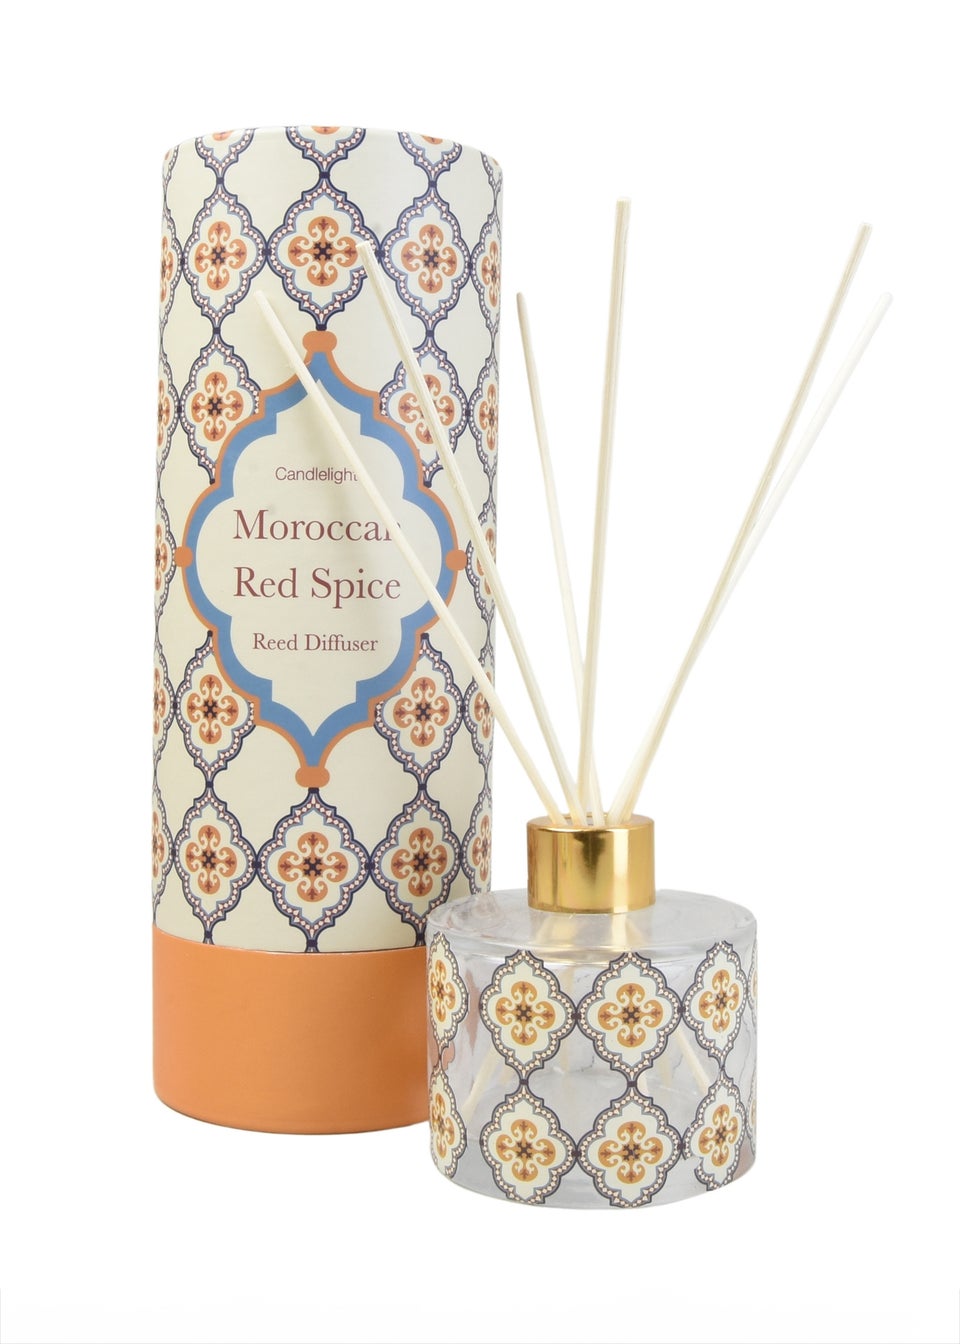 Candlelight Moroccan Red Spice Reed Diffuser (150ml)